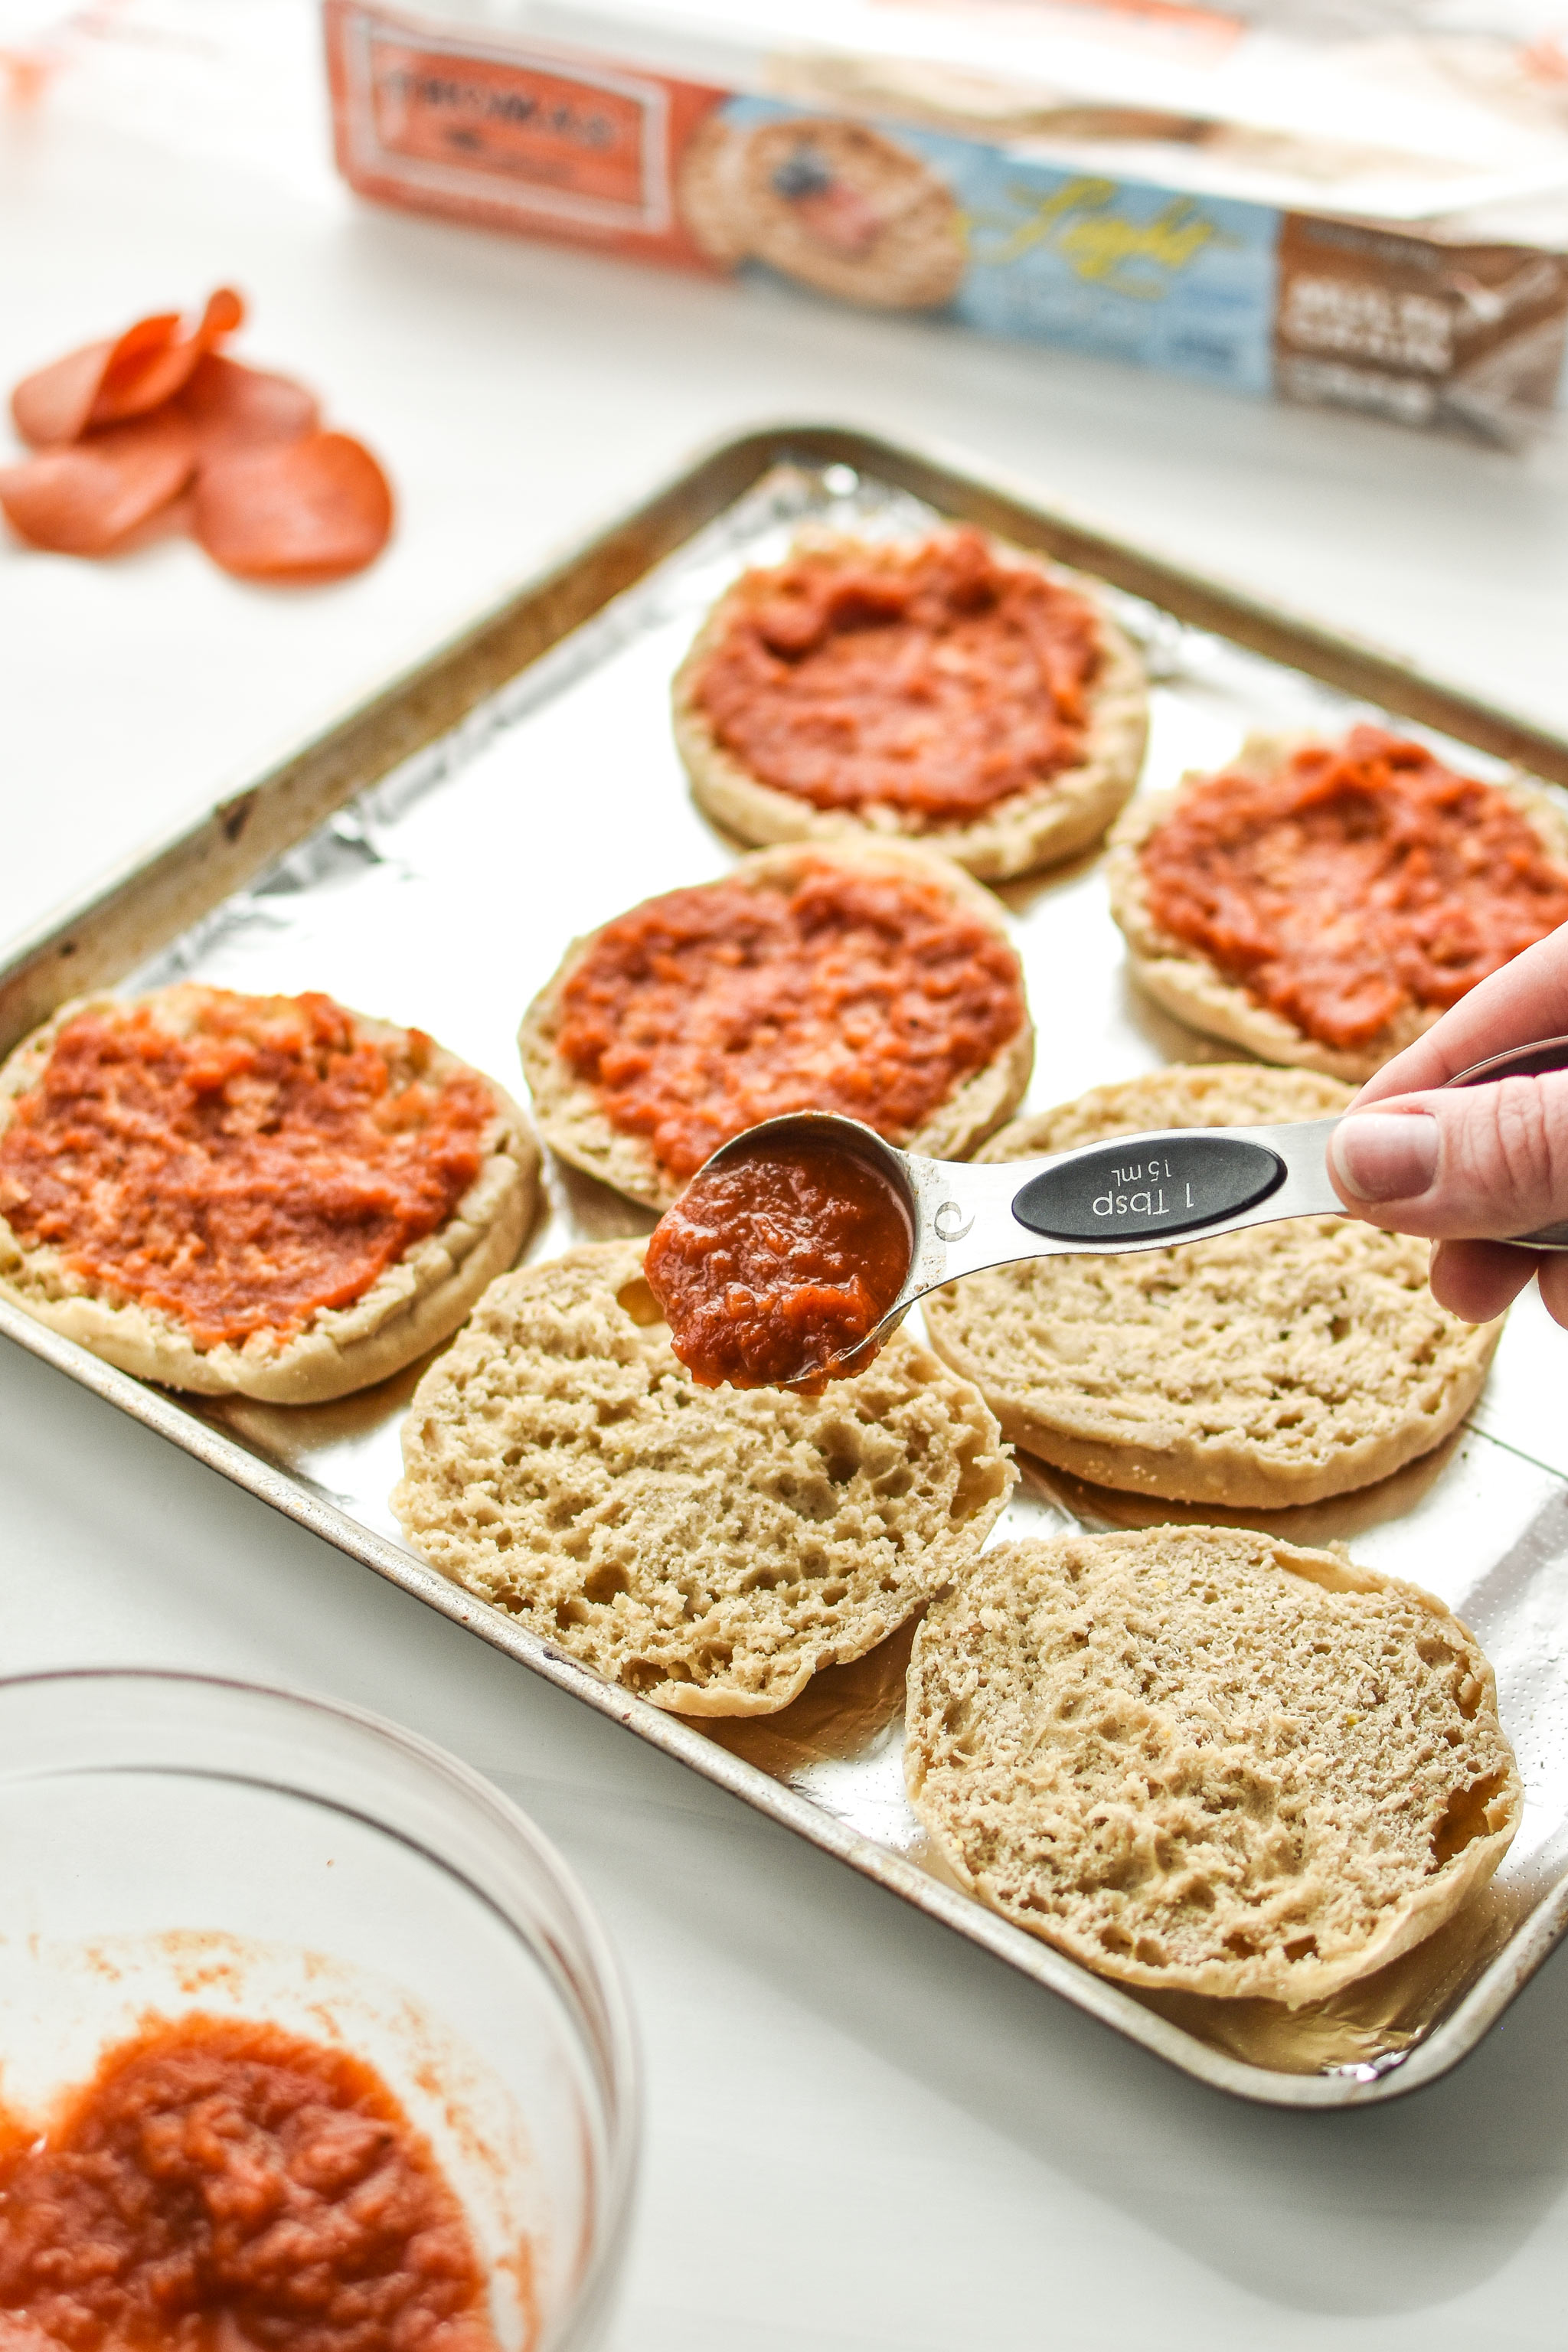 Adding sauce to the english muffins for the english muffin mini pizza meal prep